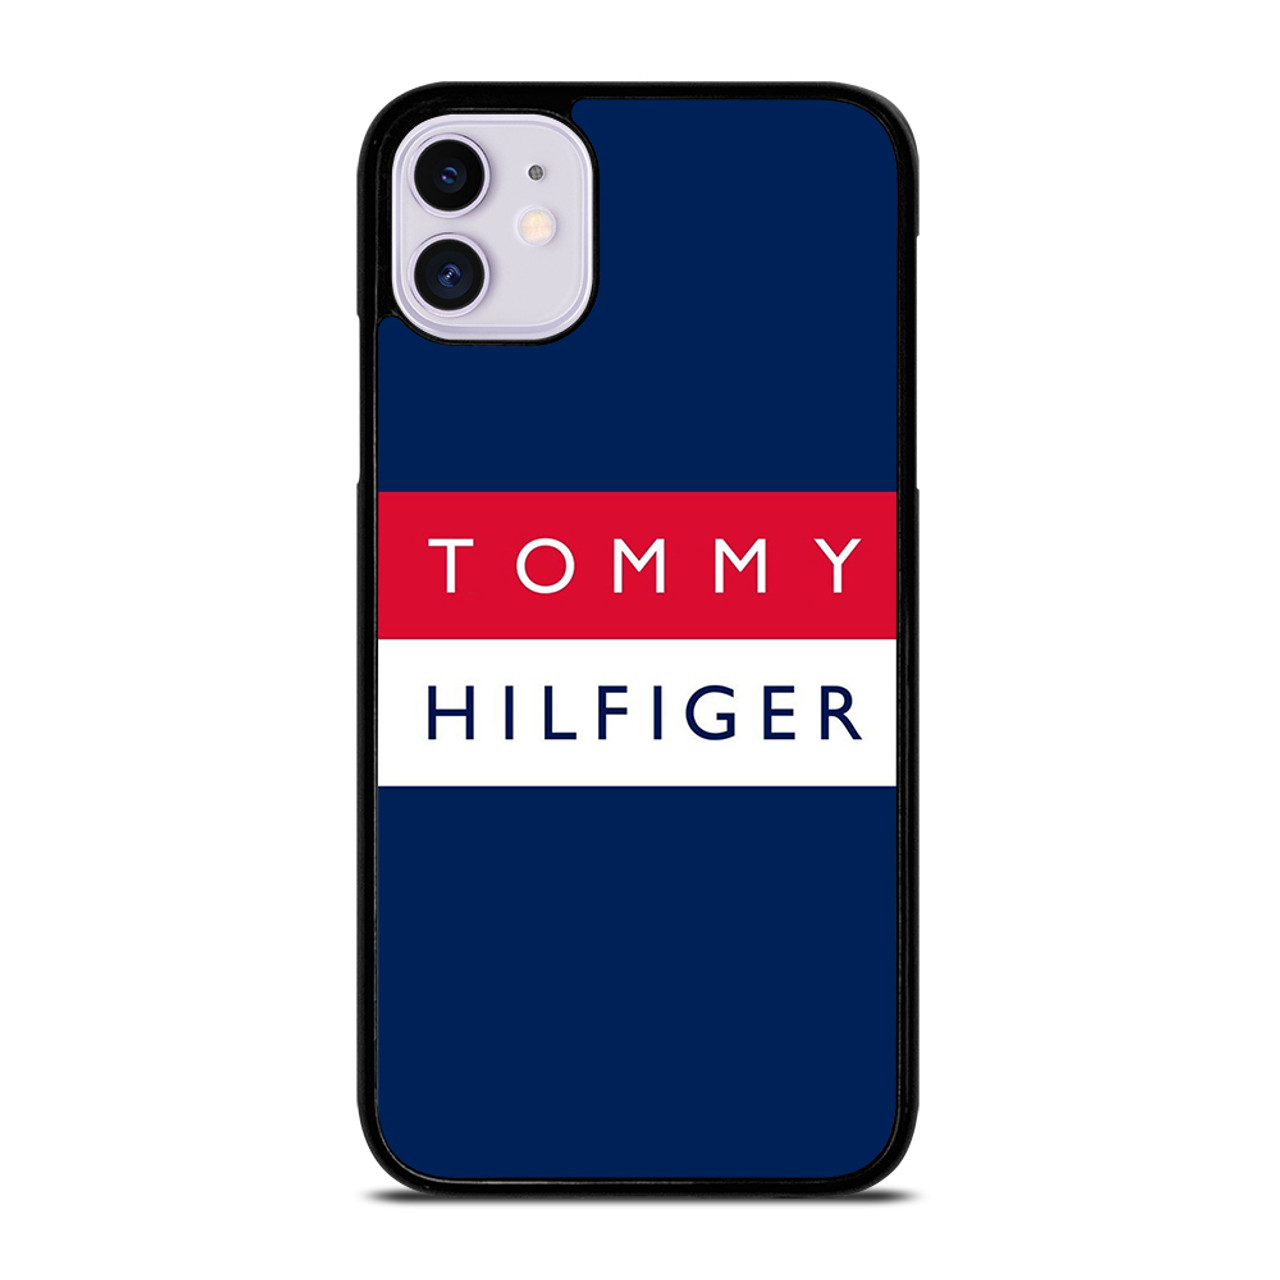 TOMMY HILFIGER iPhone Case